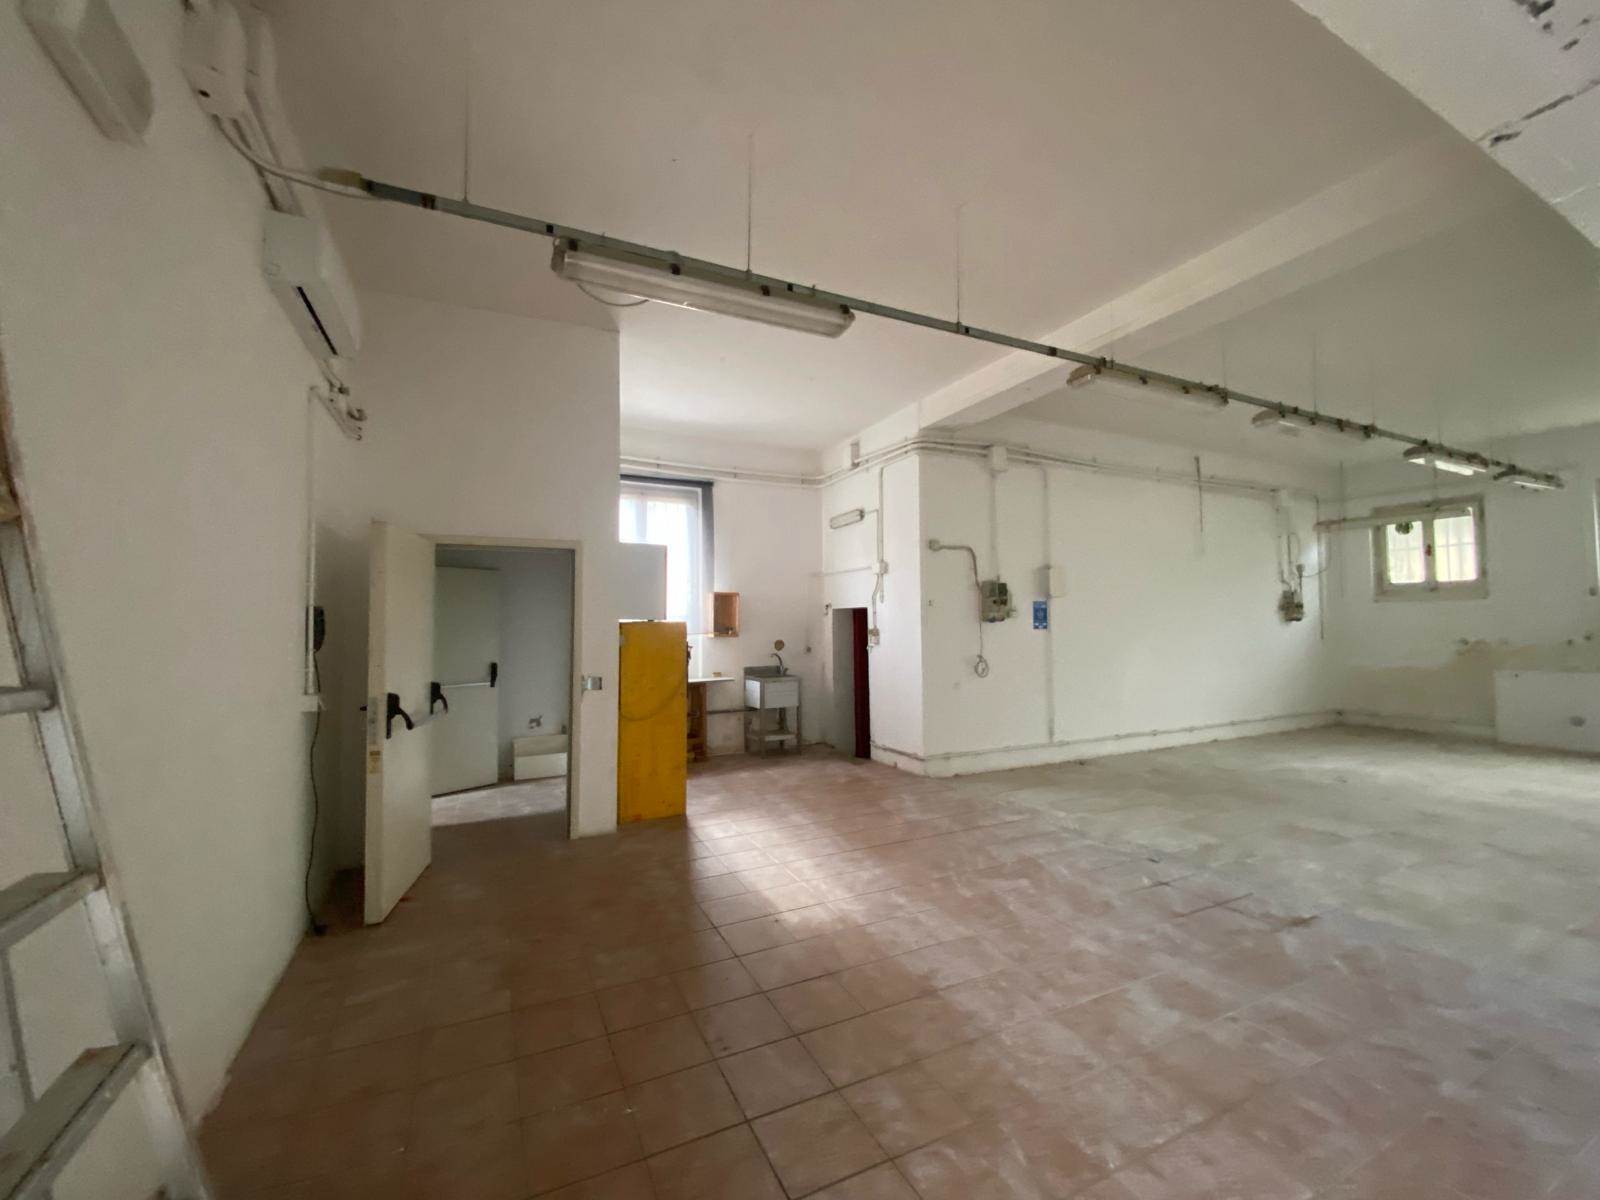 SOFFIANO, FIRENZE, Warehouse for sale of 200 Sq. mt., Good condition, Energetic class: G, composed by: , 1 Bathroom, Price: € 200,000